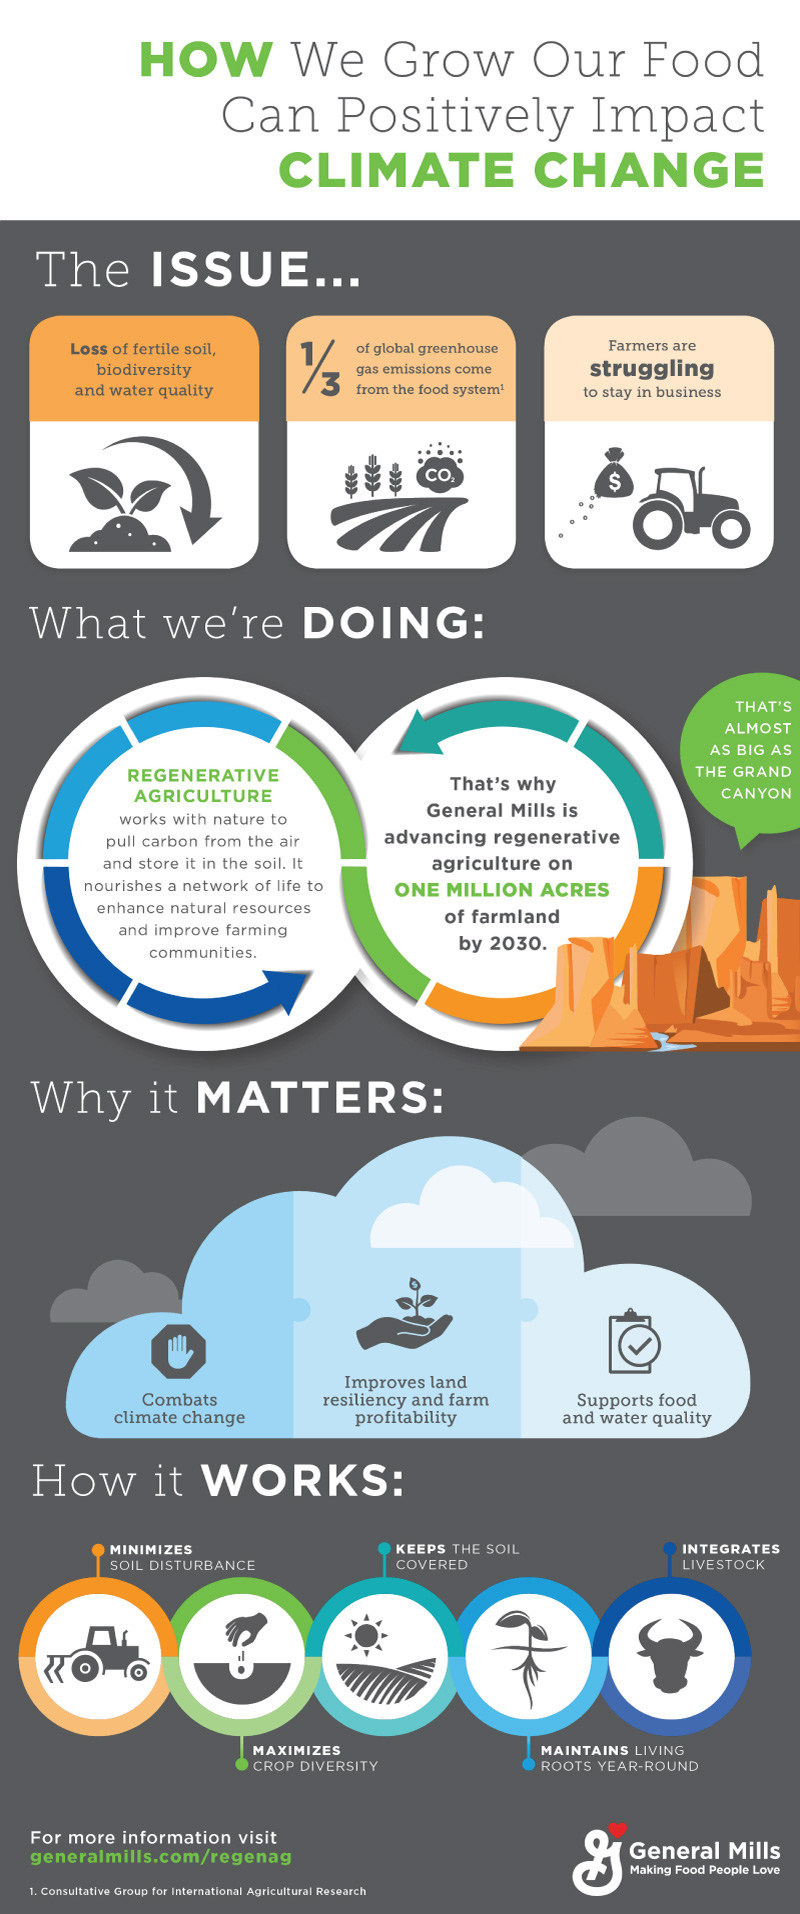 General Mills How we Grow our Food Infographic